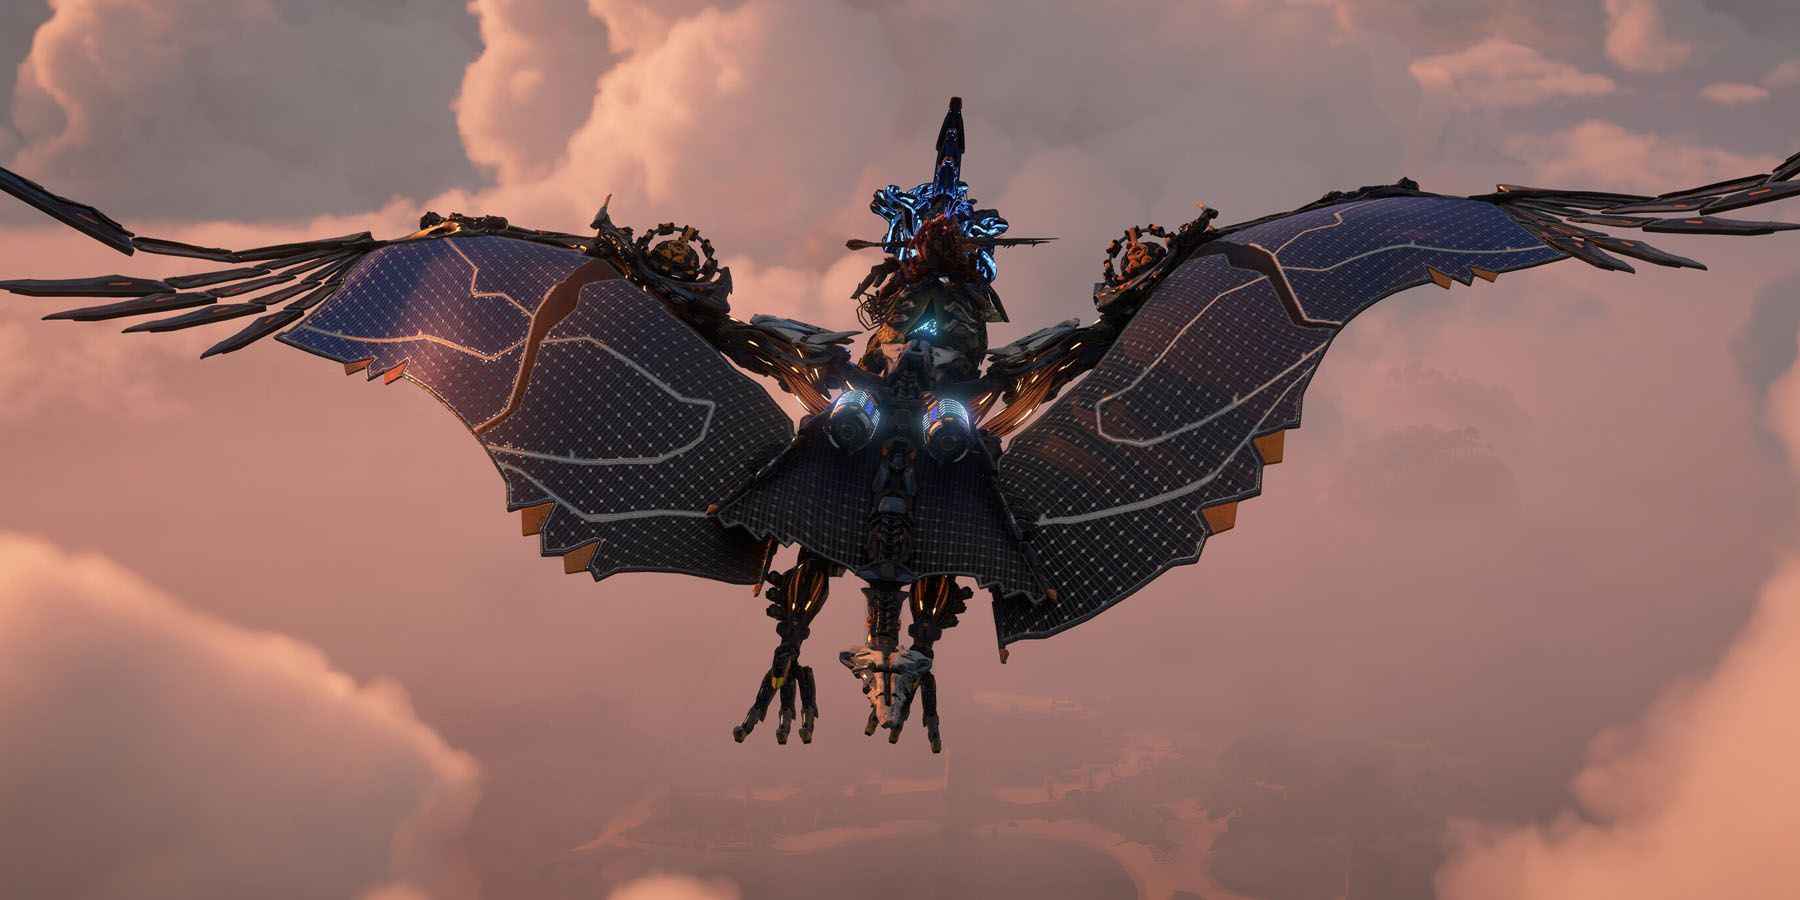 A screenshot from Horizon Forbidden West, featuring Aloy riding a flying mount in the sky.